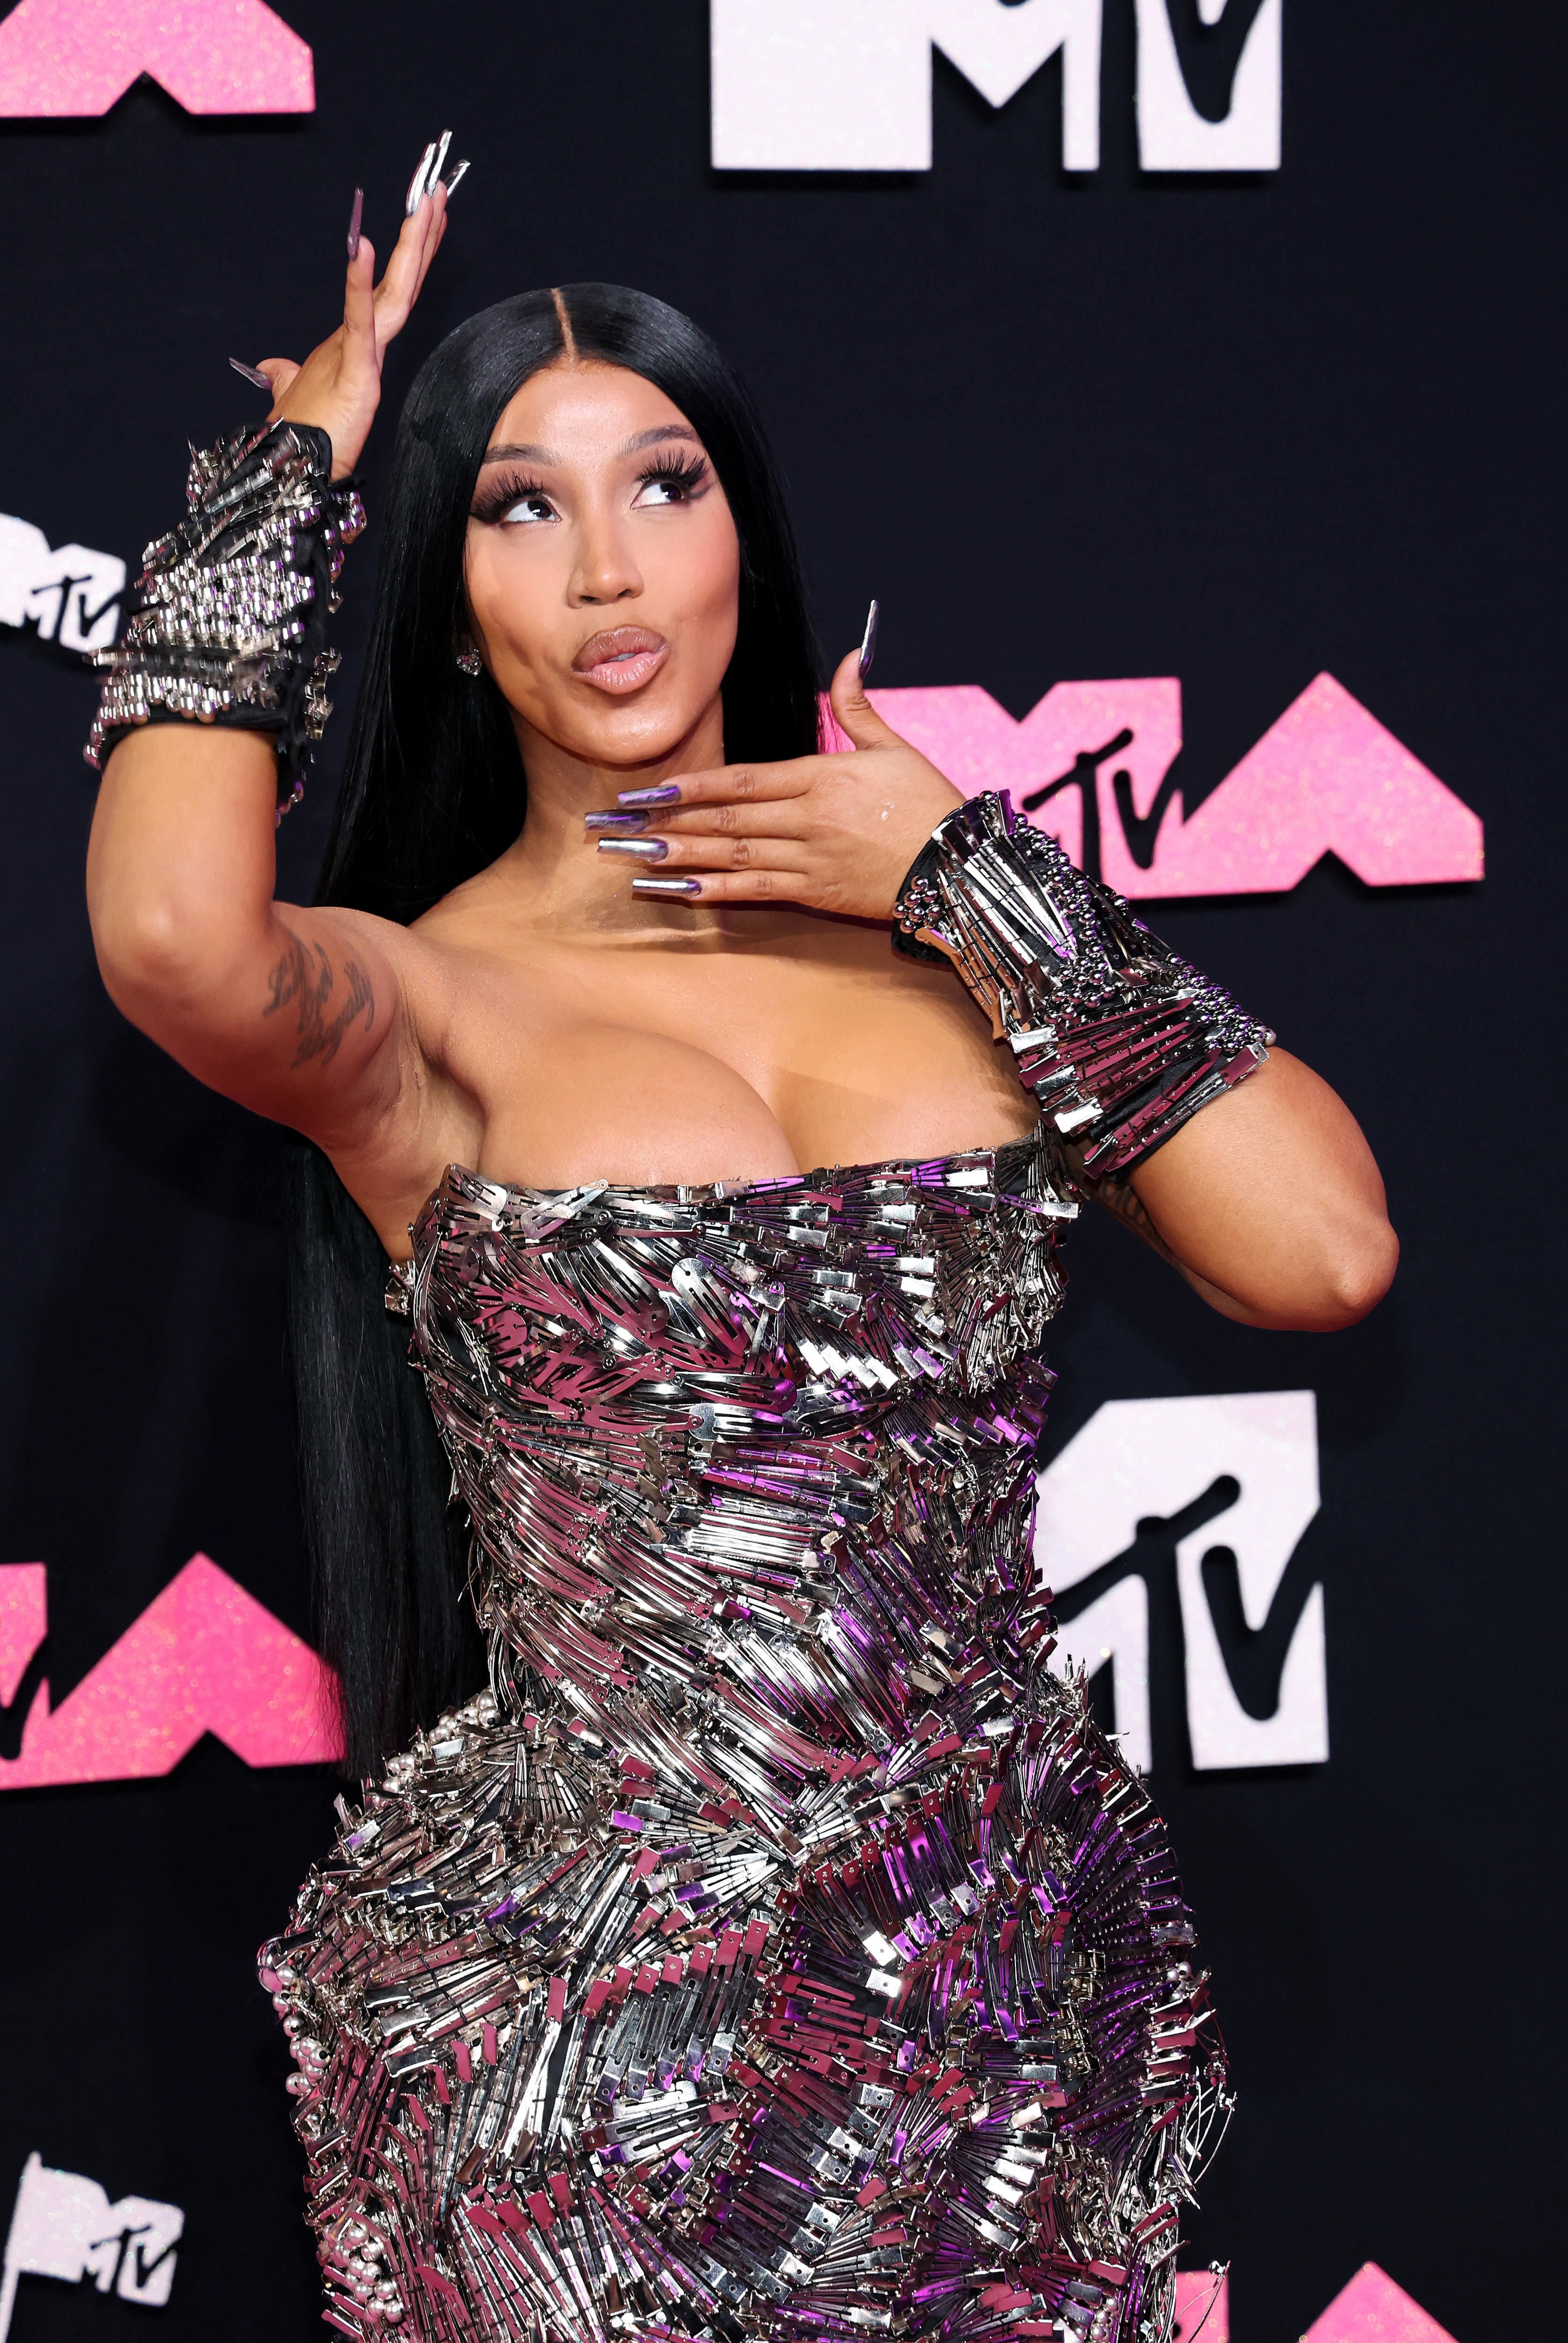 Cardi B is wearing a shiny silver dress while she poses holding her hands up to her face.